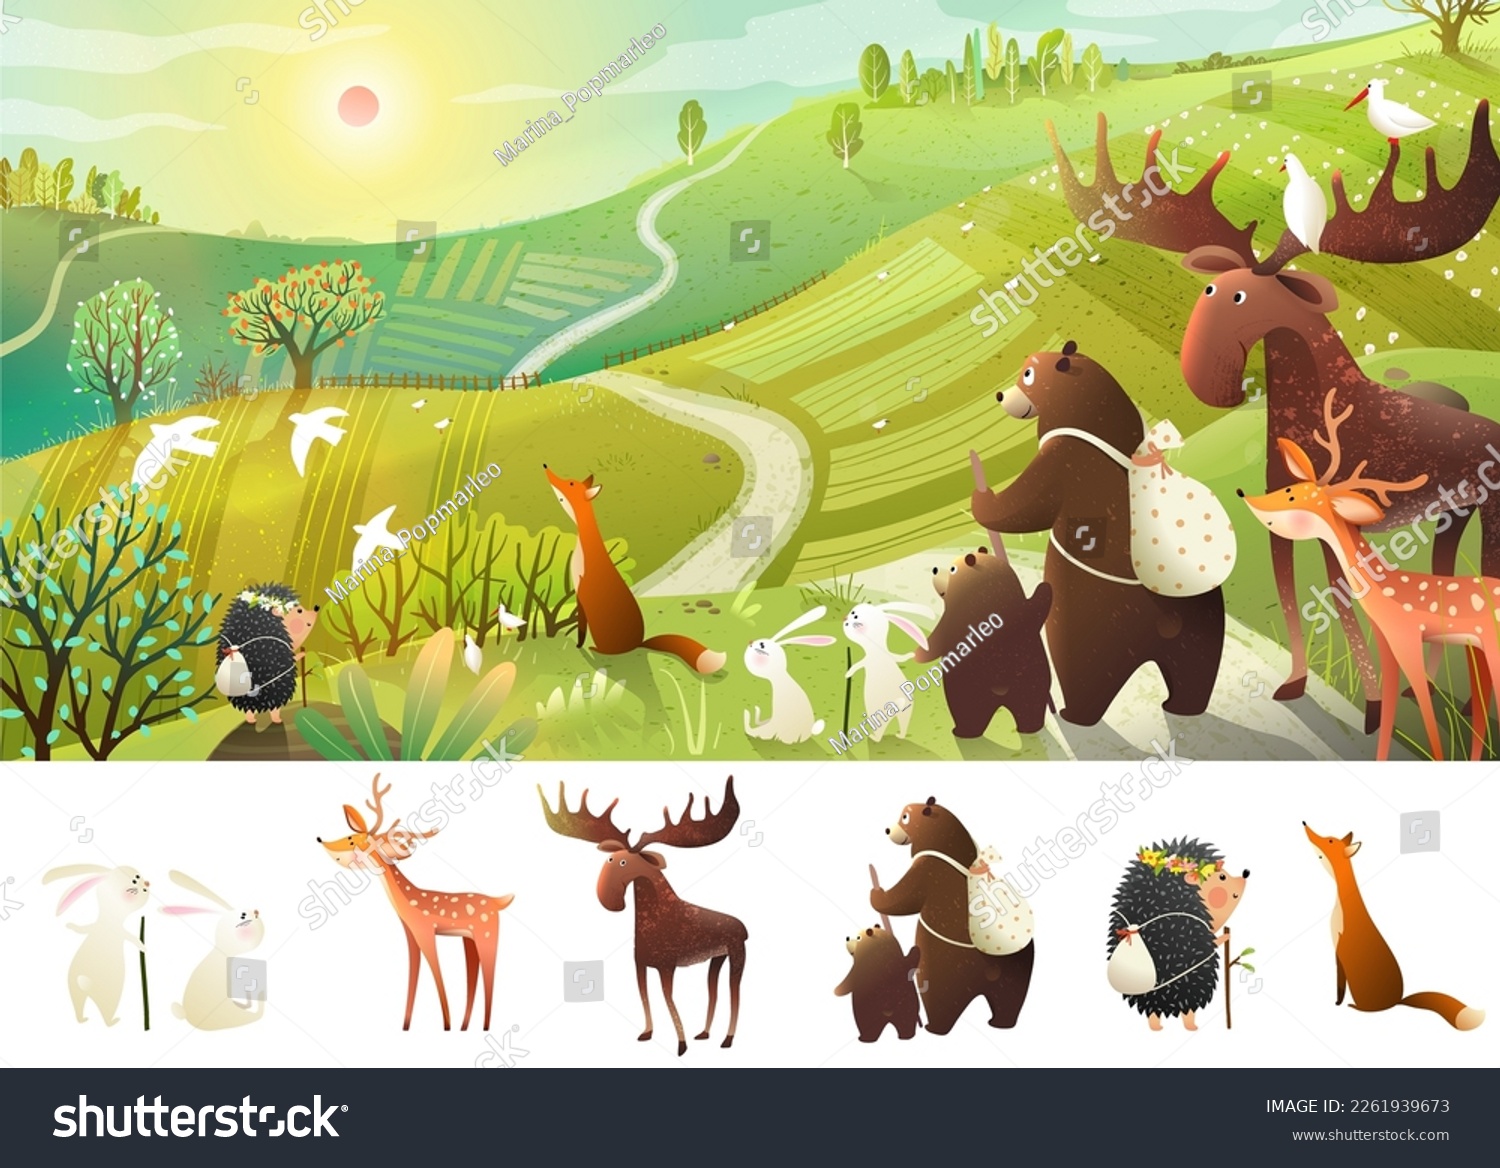 SVG of Hiking animals adventures and road trip in country landscape. Bear, moose backpack hiking tale in wild nature scenery. Animals in nature wallpaper. Hand drawn vector illustration in watercolor style. svg